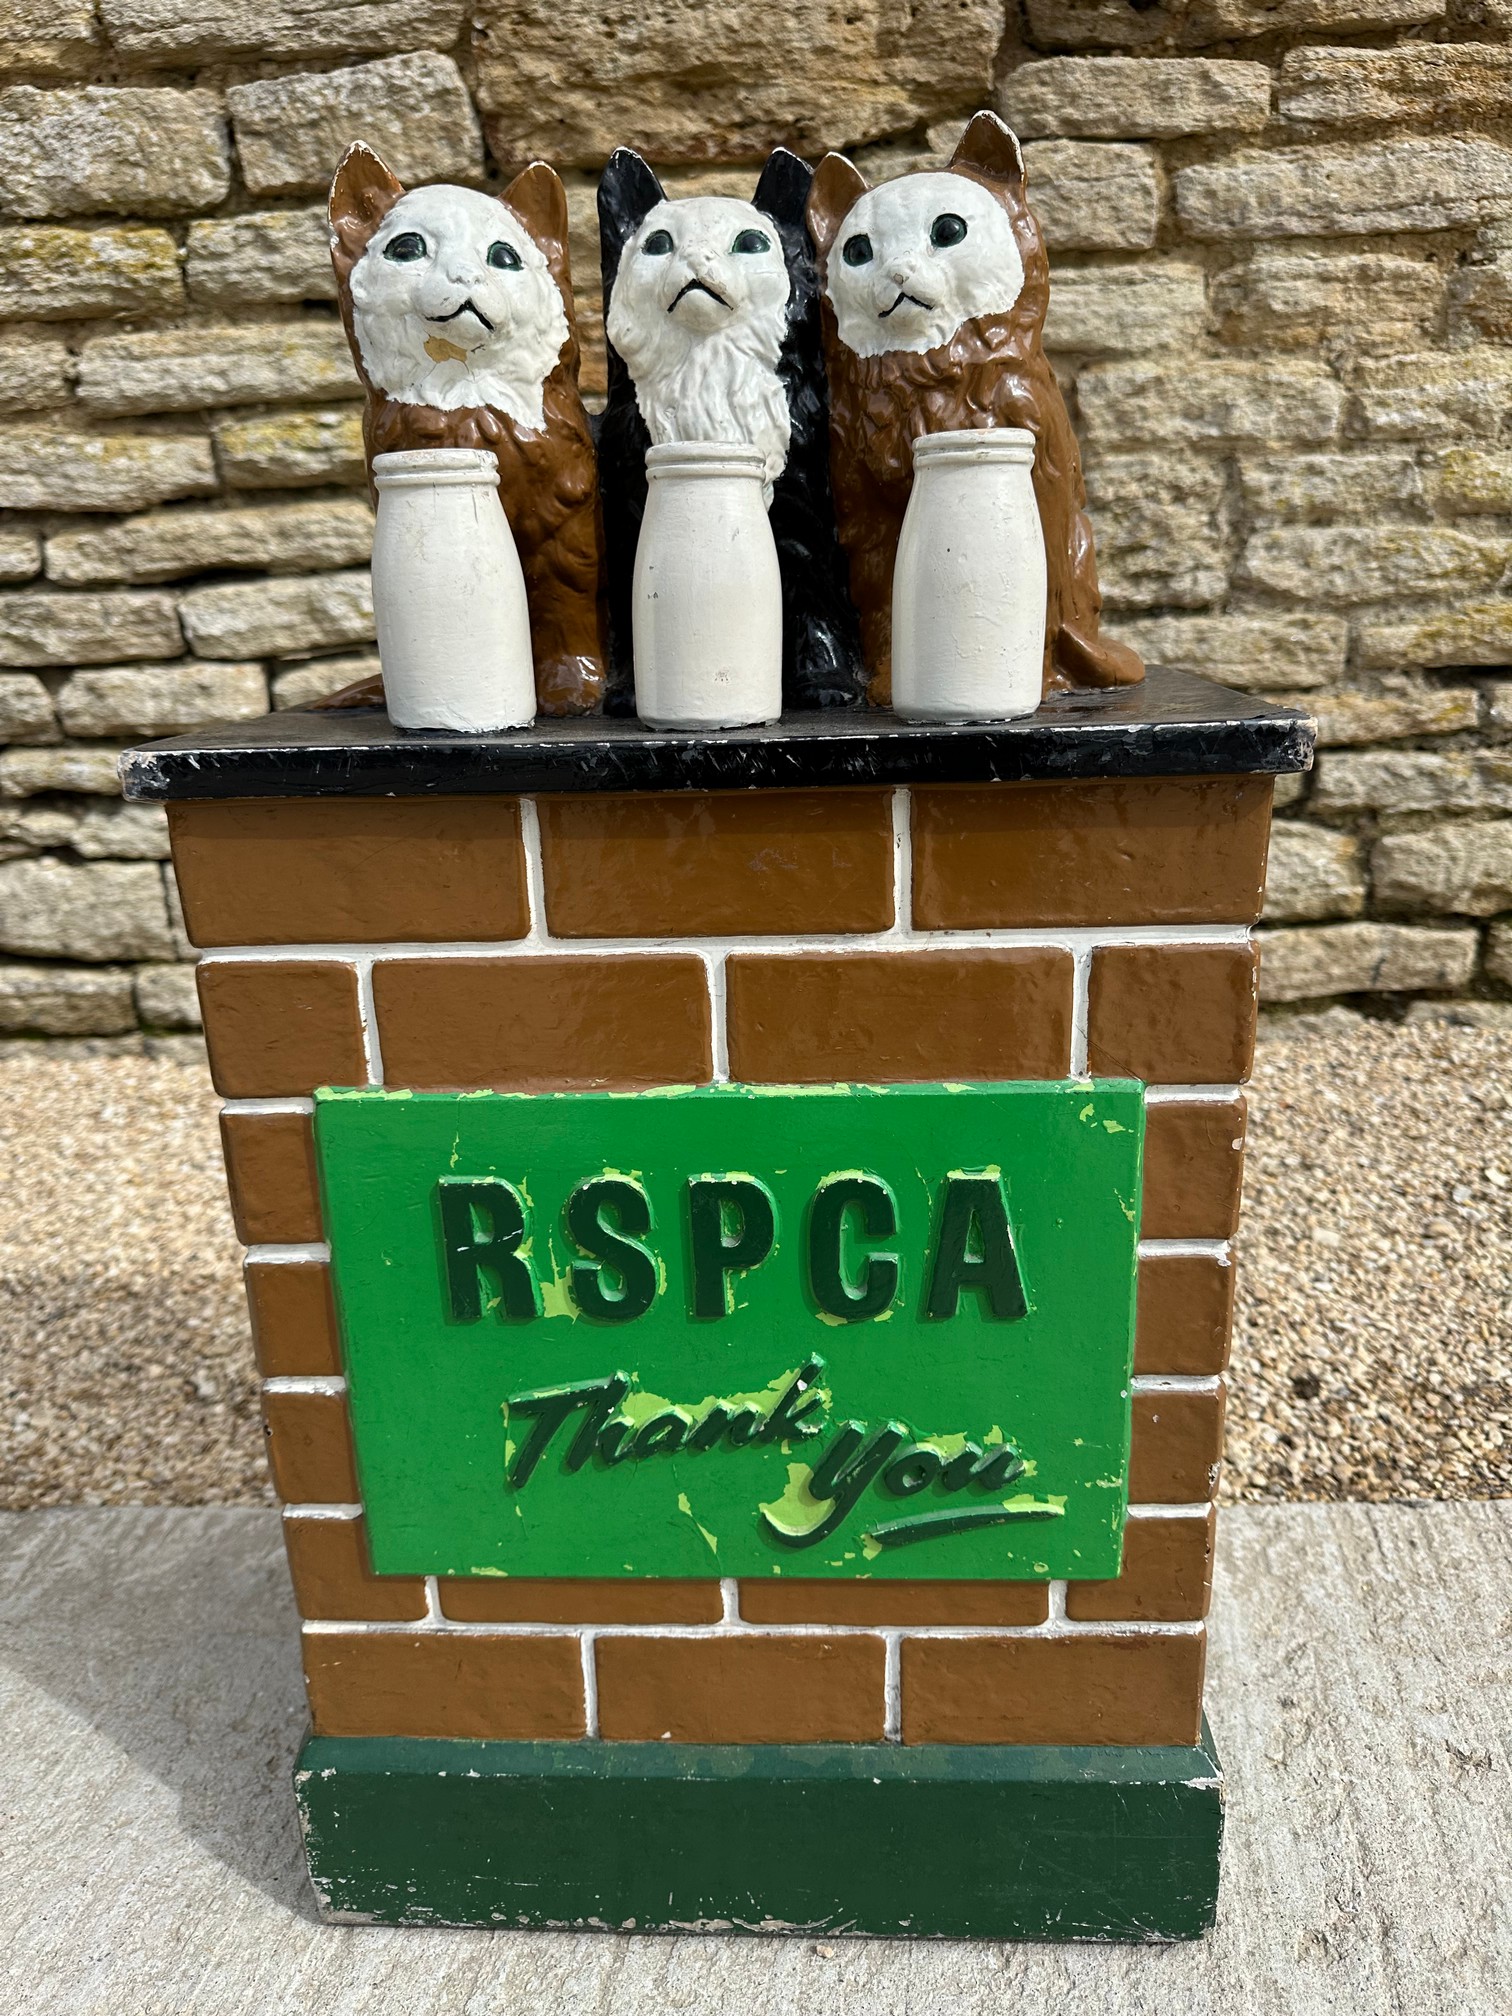 An RSPCA charity donation box with three cats upon a wall behind three milk bottles, with carry